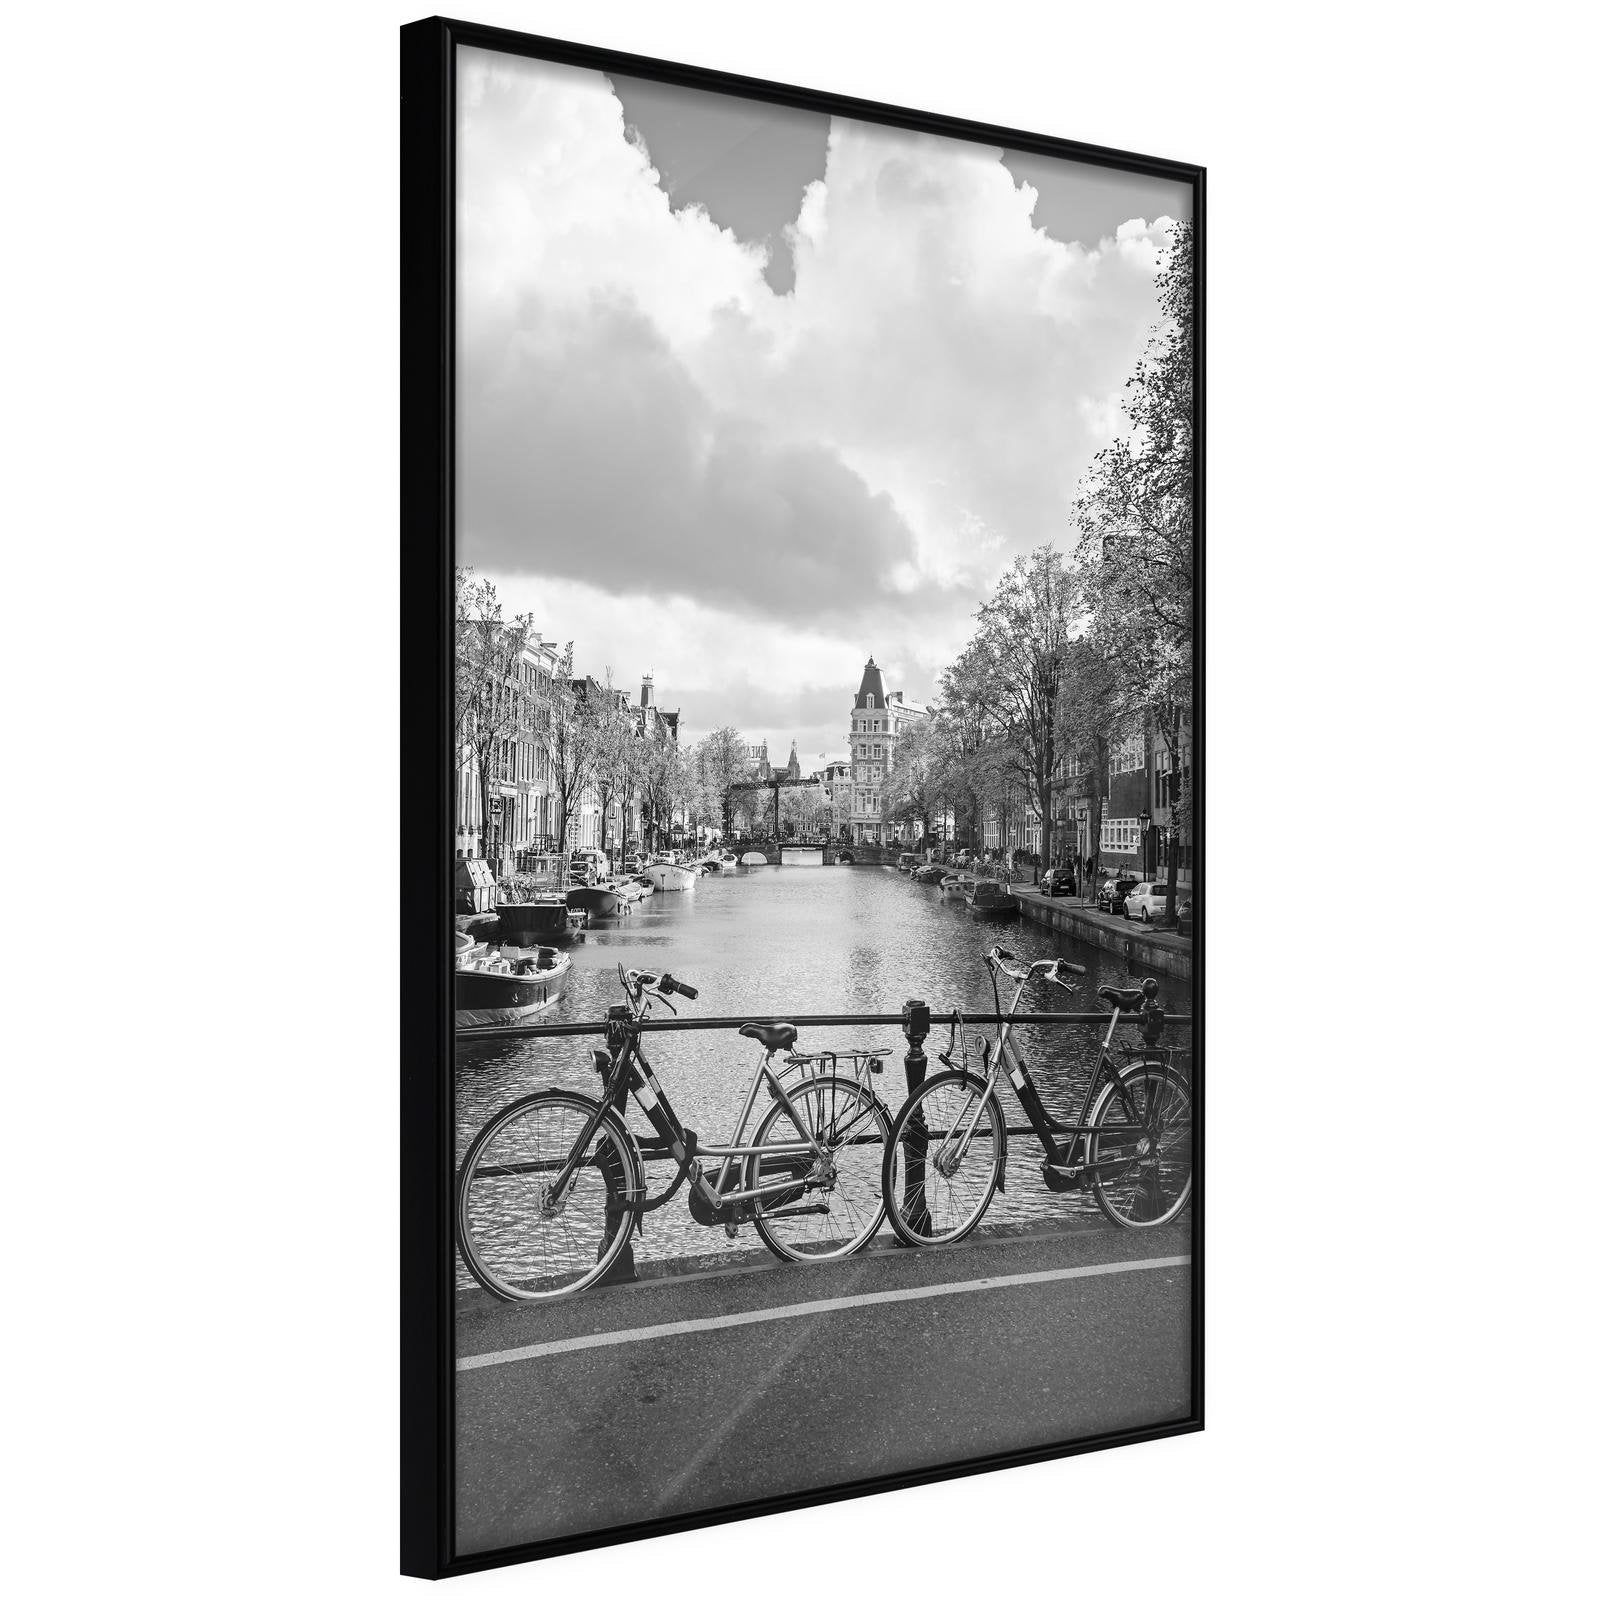 Inramad Poster / Tavla - Bicycles Against Canal-Poster Inramad-Artgeist-20x30-Svart ram-peaceofhome.se